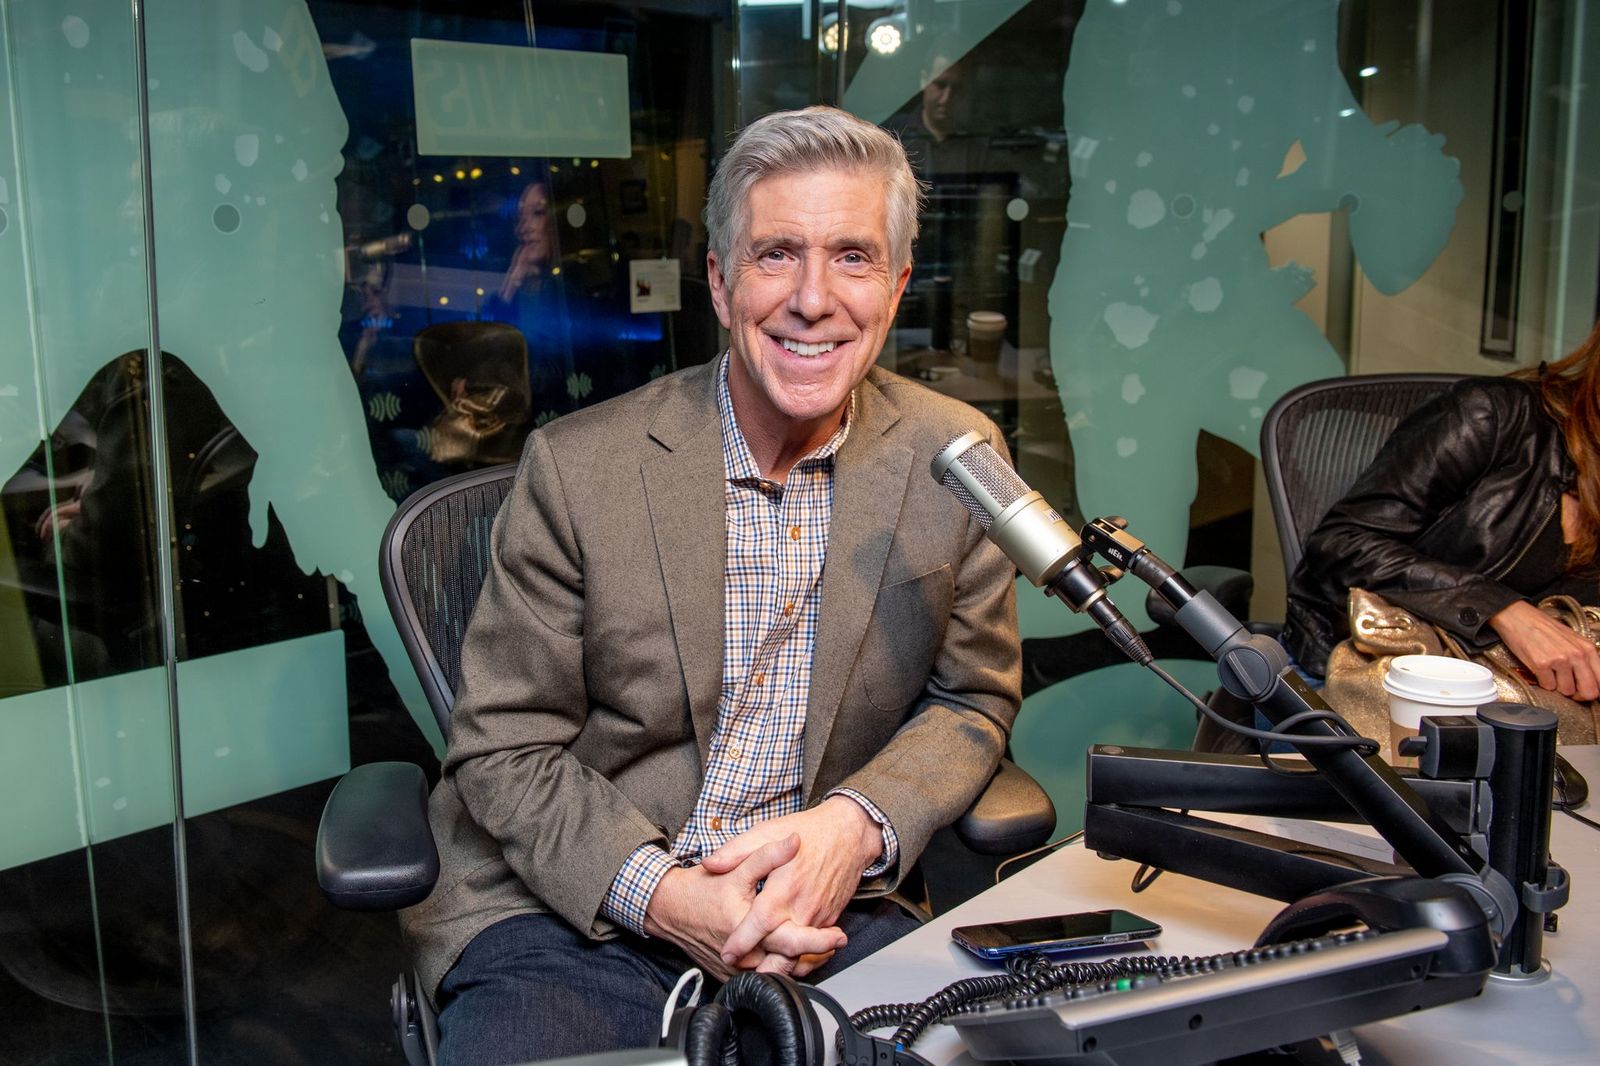 American television personality Tom Bergeron at SiriusXM Studios on August 21, 2019 | Photo: Getty Images